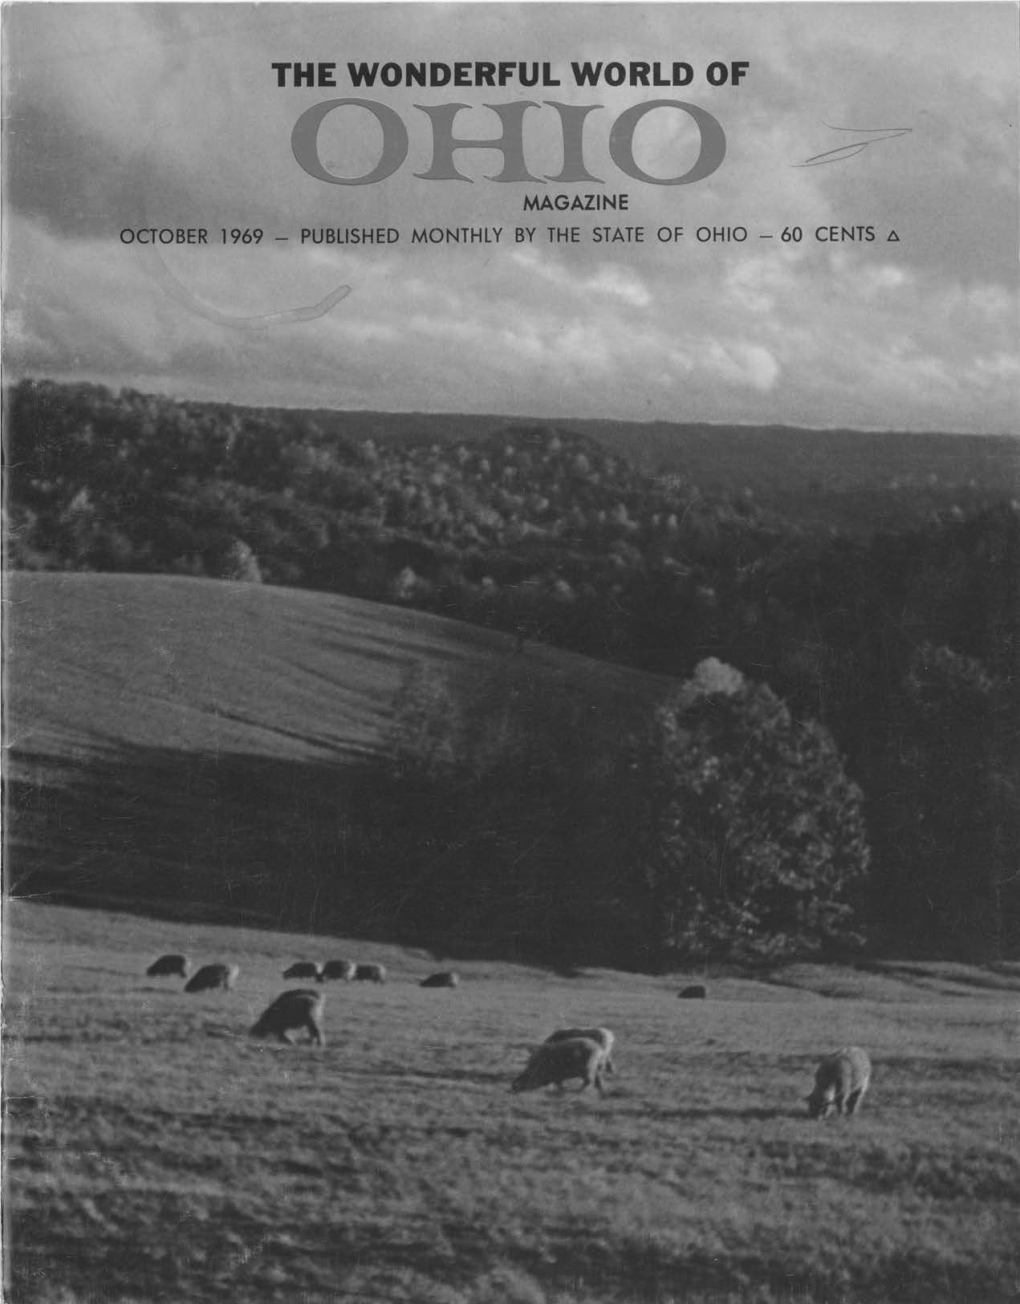 Published Monthly by the State of Ohio - 60 Cents A